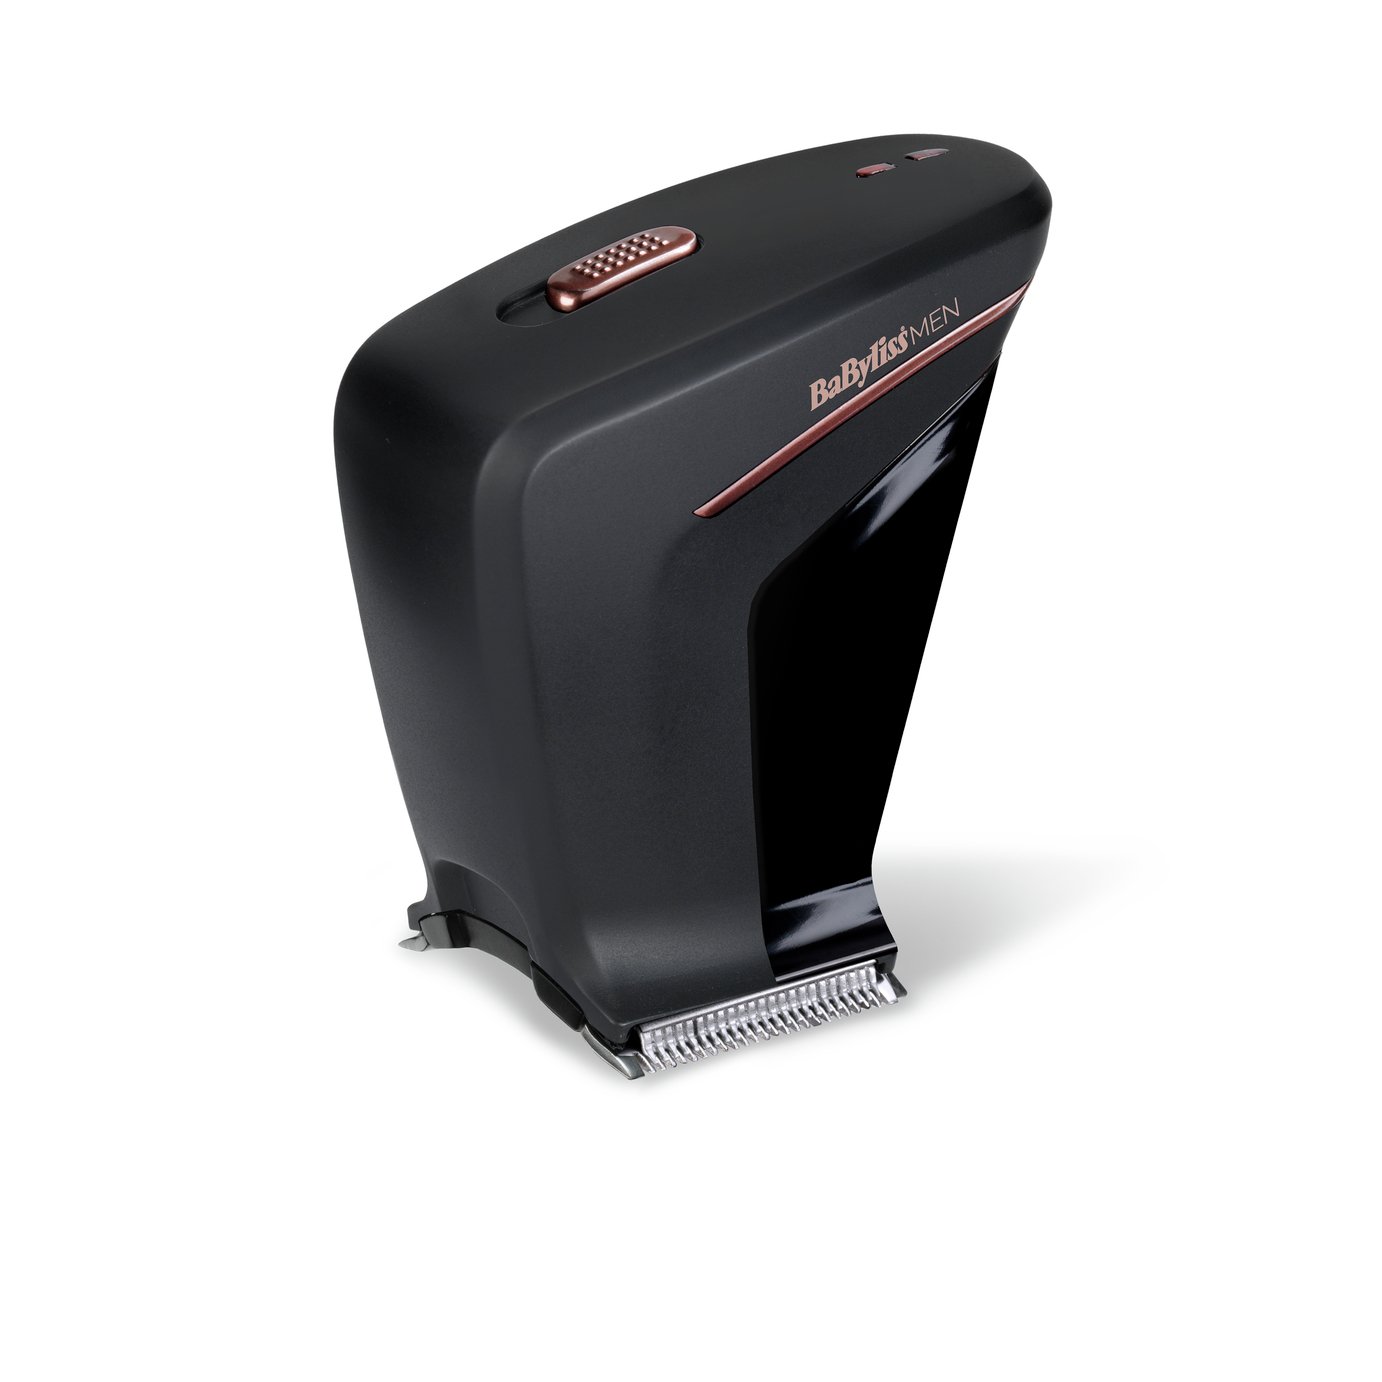 argos mens hair clippers in stock